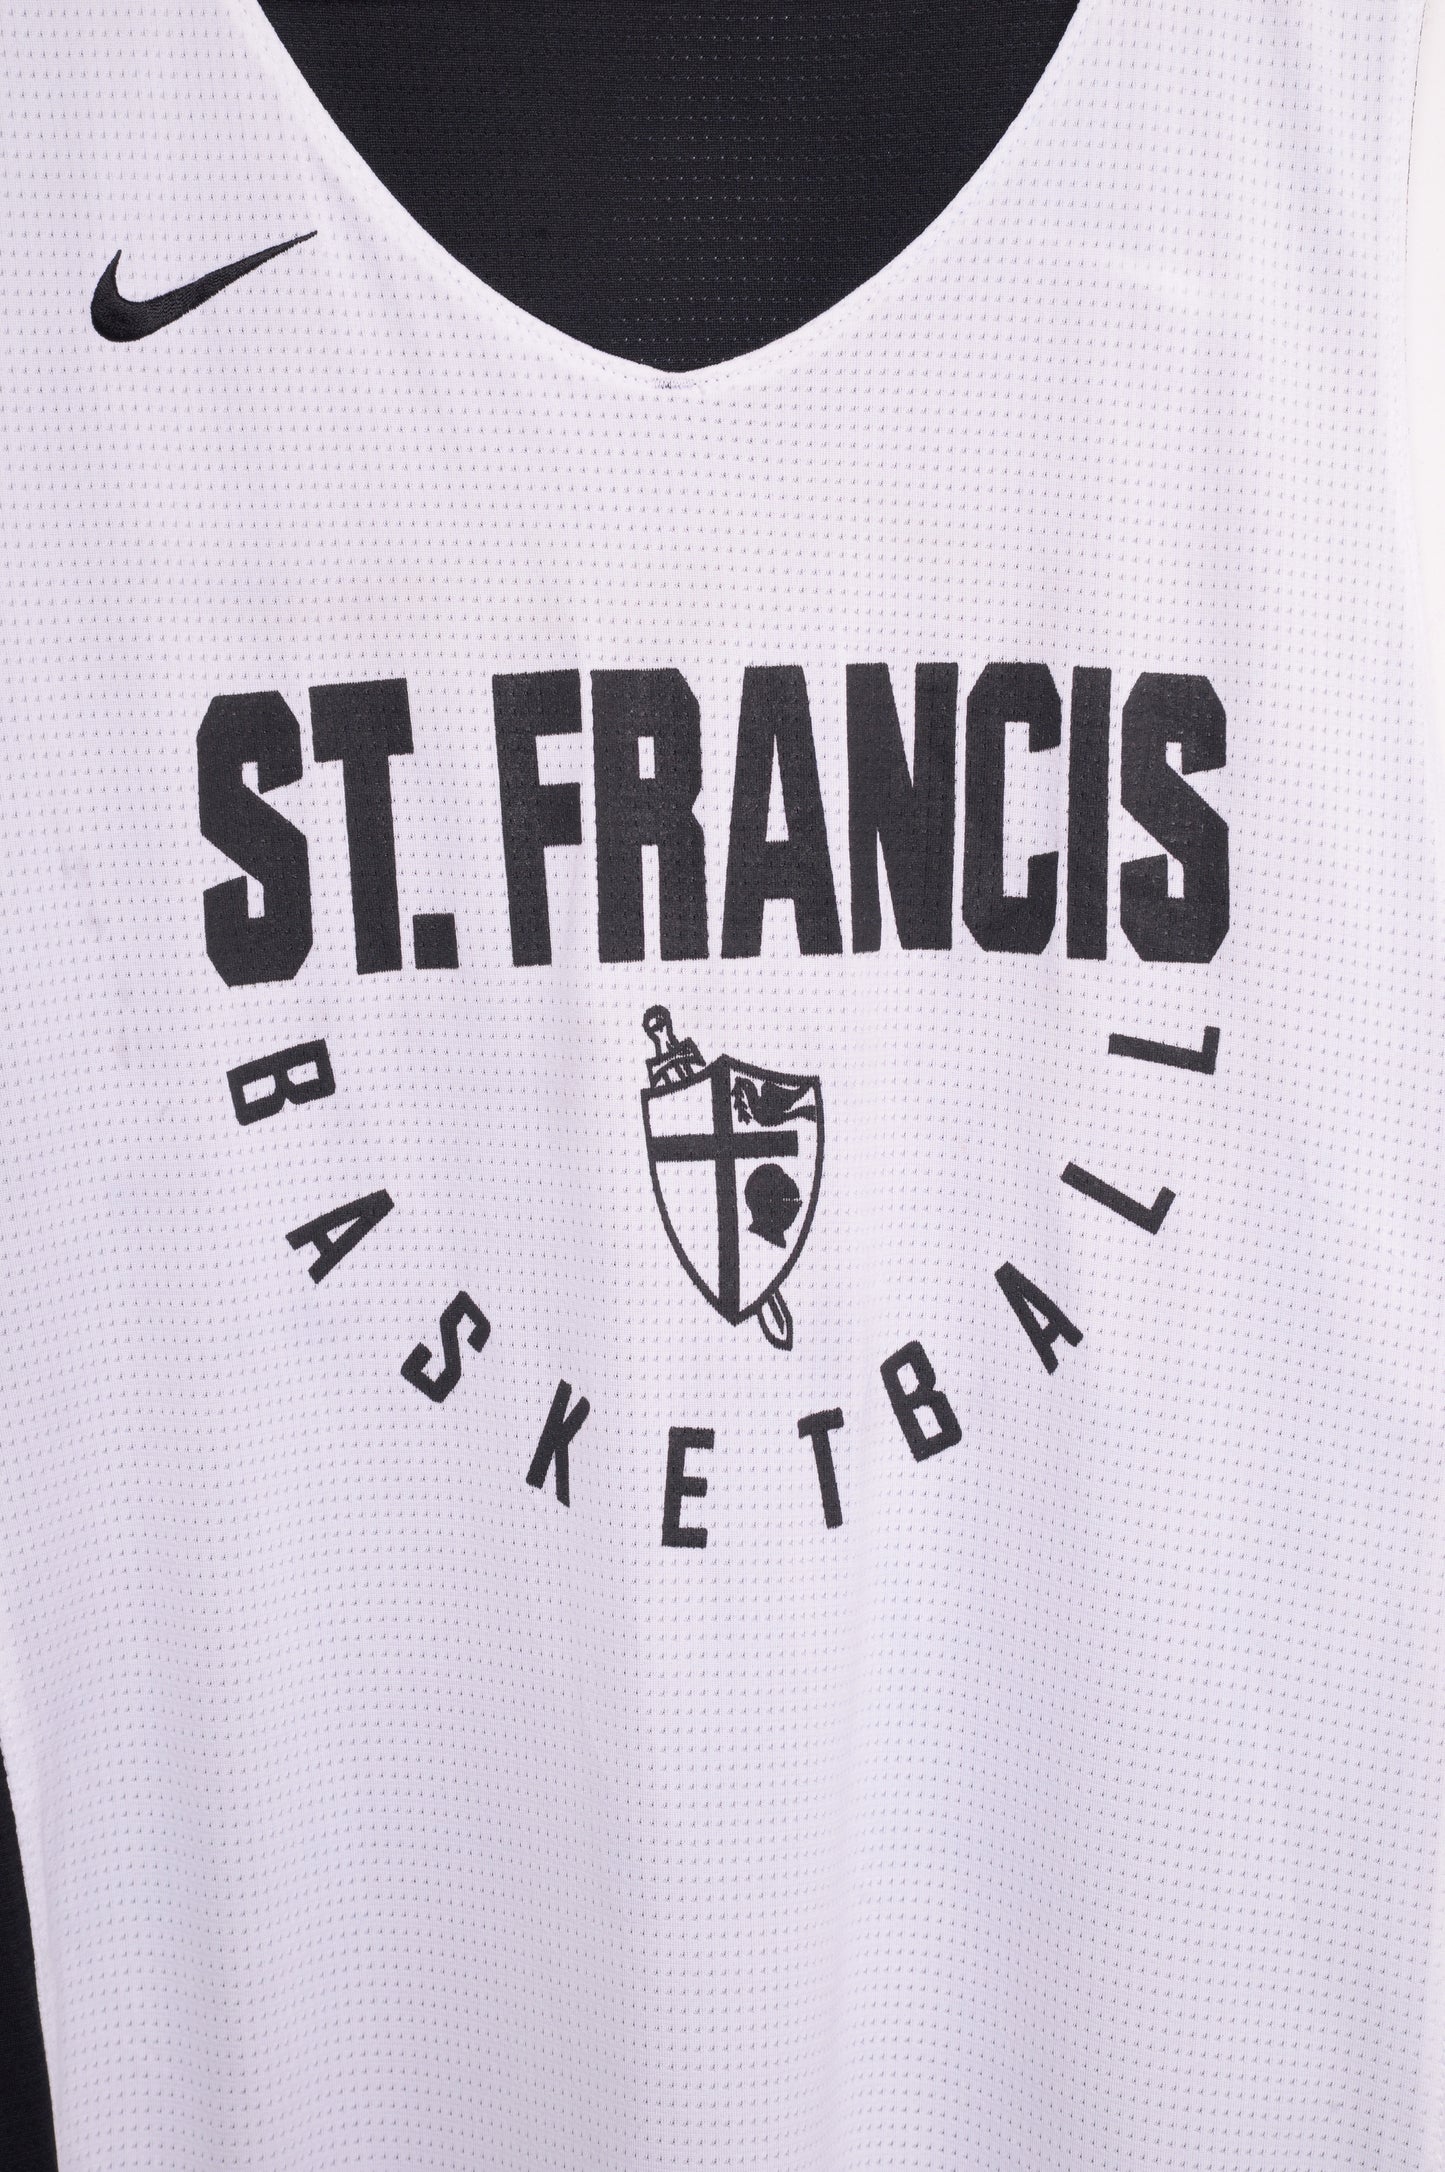 Reversible St. Francis Terriers Jersey